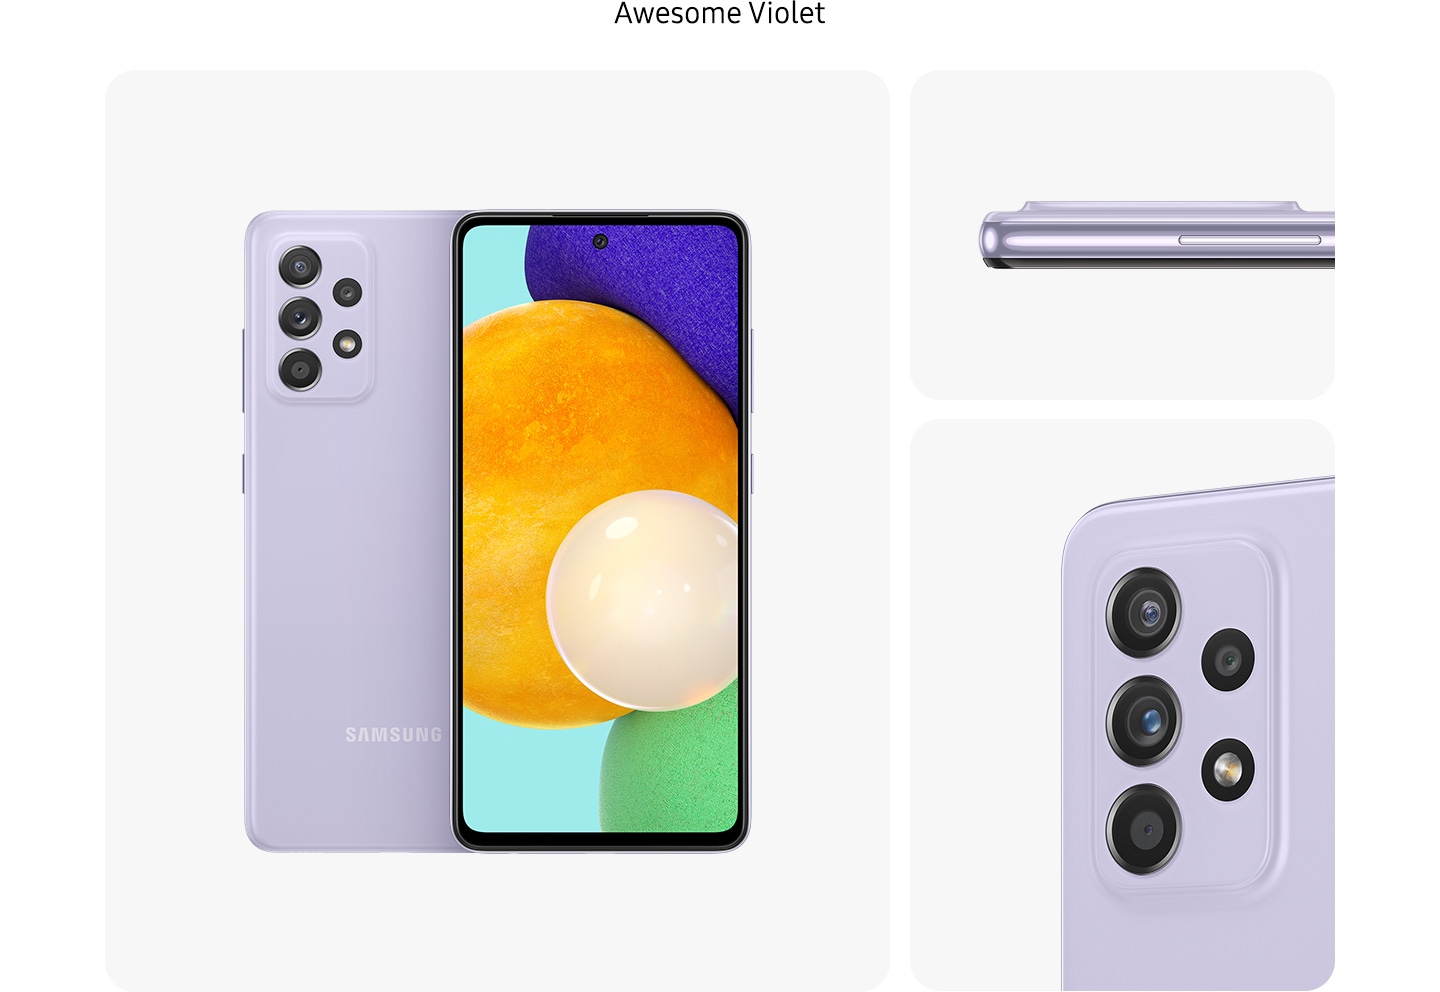 1. VioletGalaxy A52 5G in Awesome Violet, seen from multiple angles to show the design: rear, front, side and close-up on the rear camera.